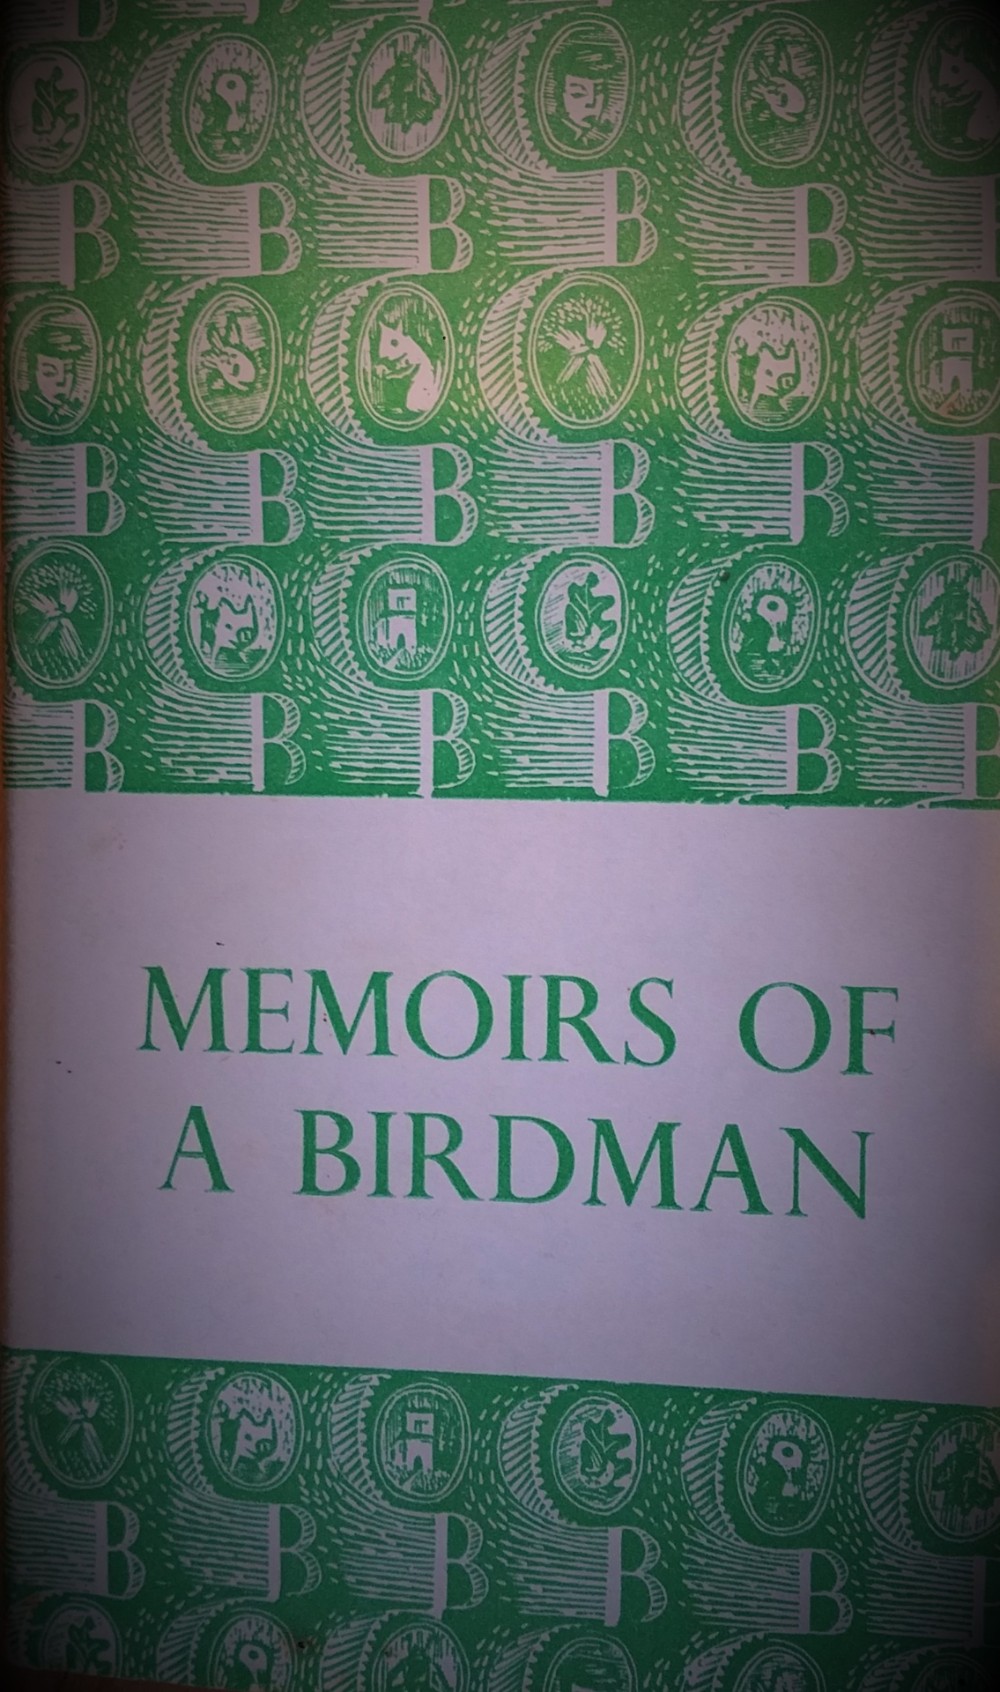 Book cover for "Memoirs of a Birdman" by Lugwig Koch - book about how he recorded bird song